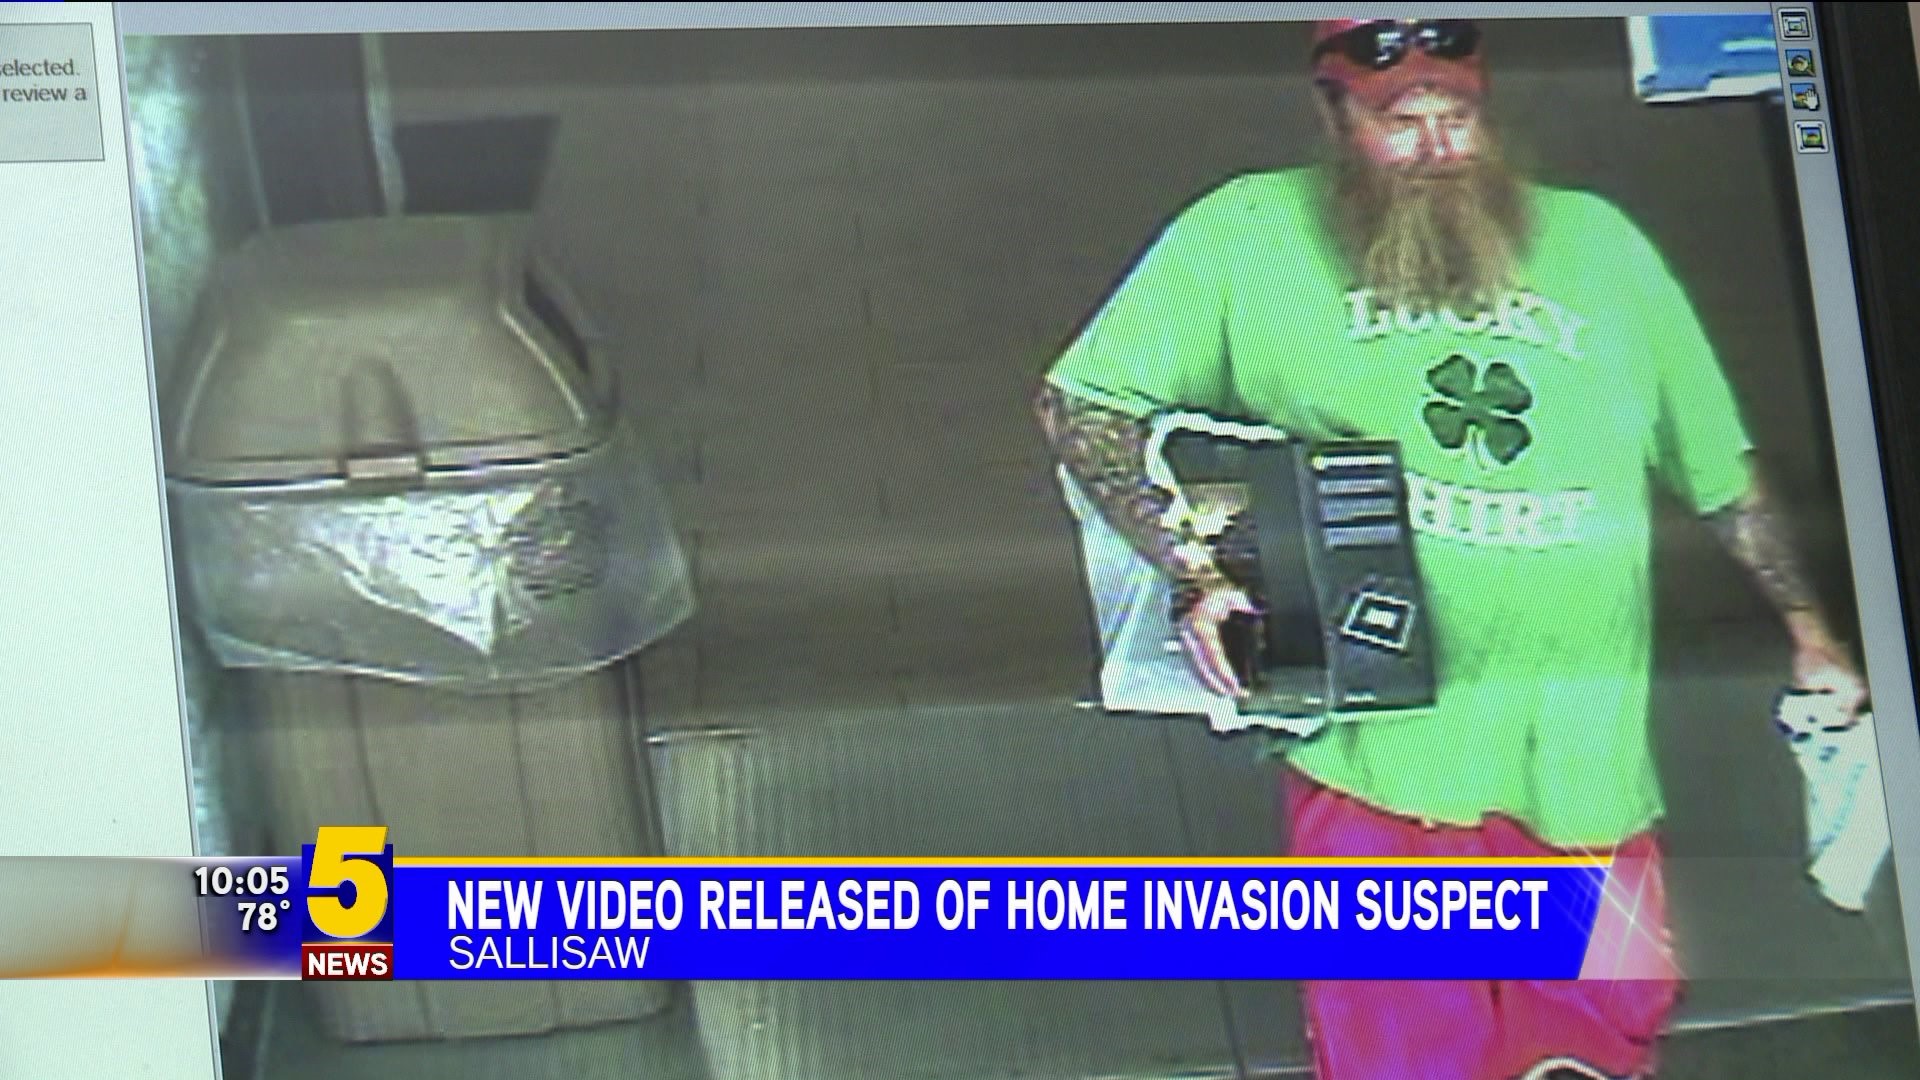 New Video Of Sallisaw Home Invasion Suspect